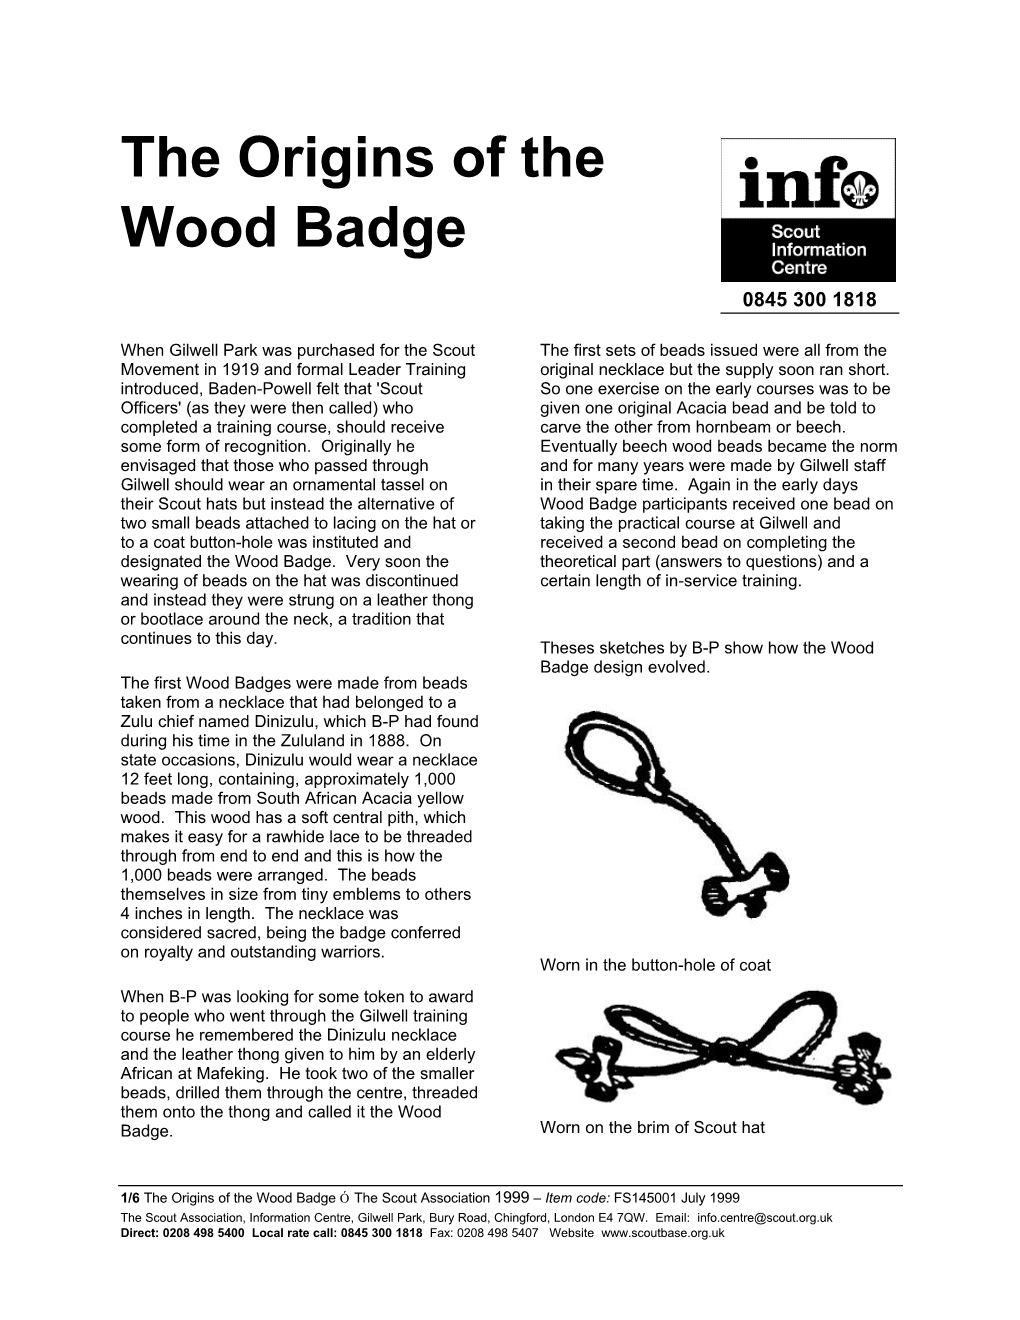 The Origins of the Wood Badge